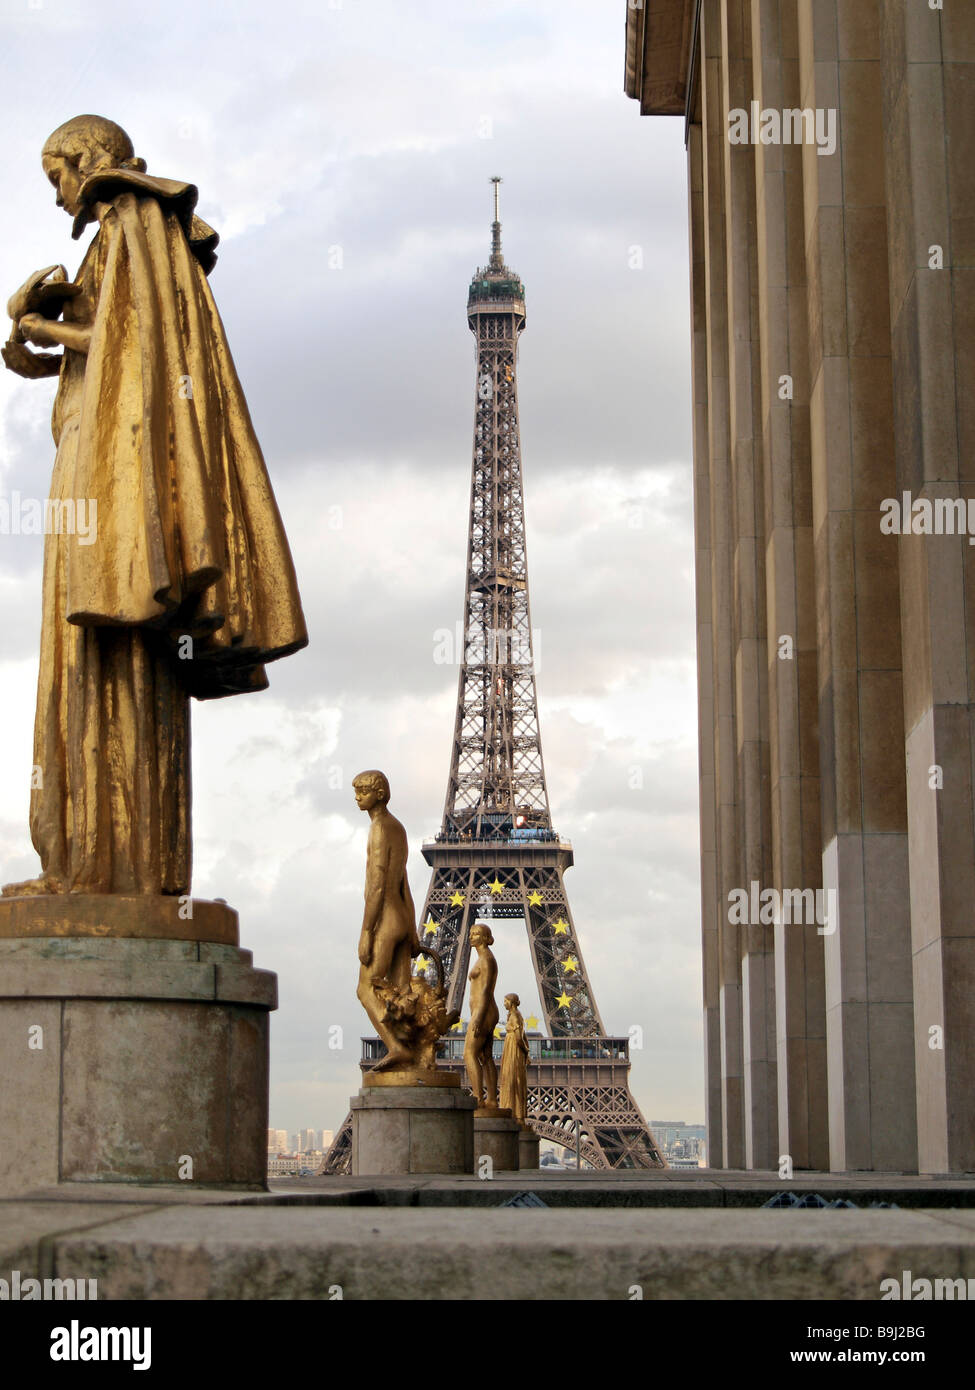 Statues at the Palais de Chaillot and the Eiffel Tower, Paris, France, Europe Stock Photo